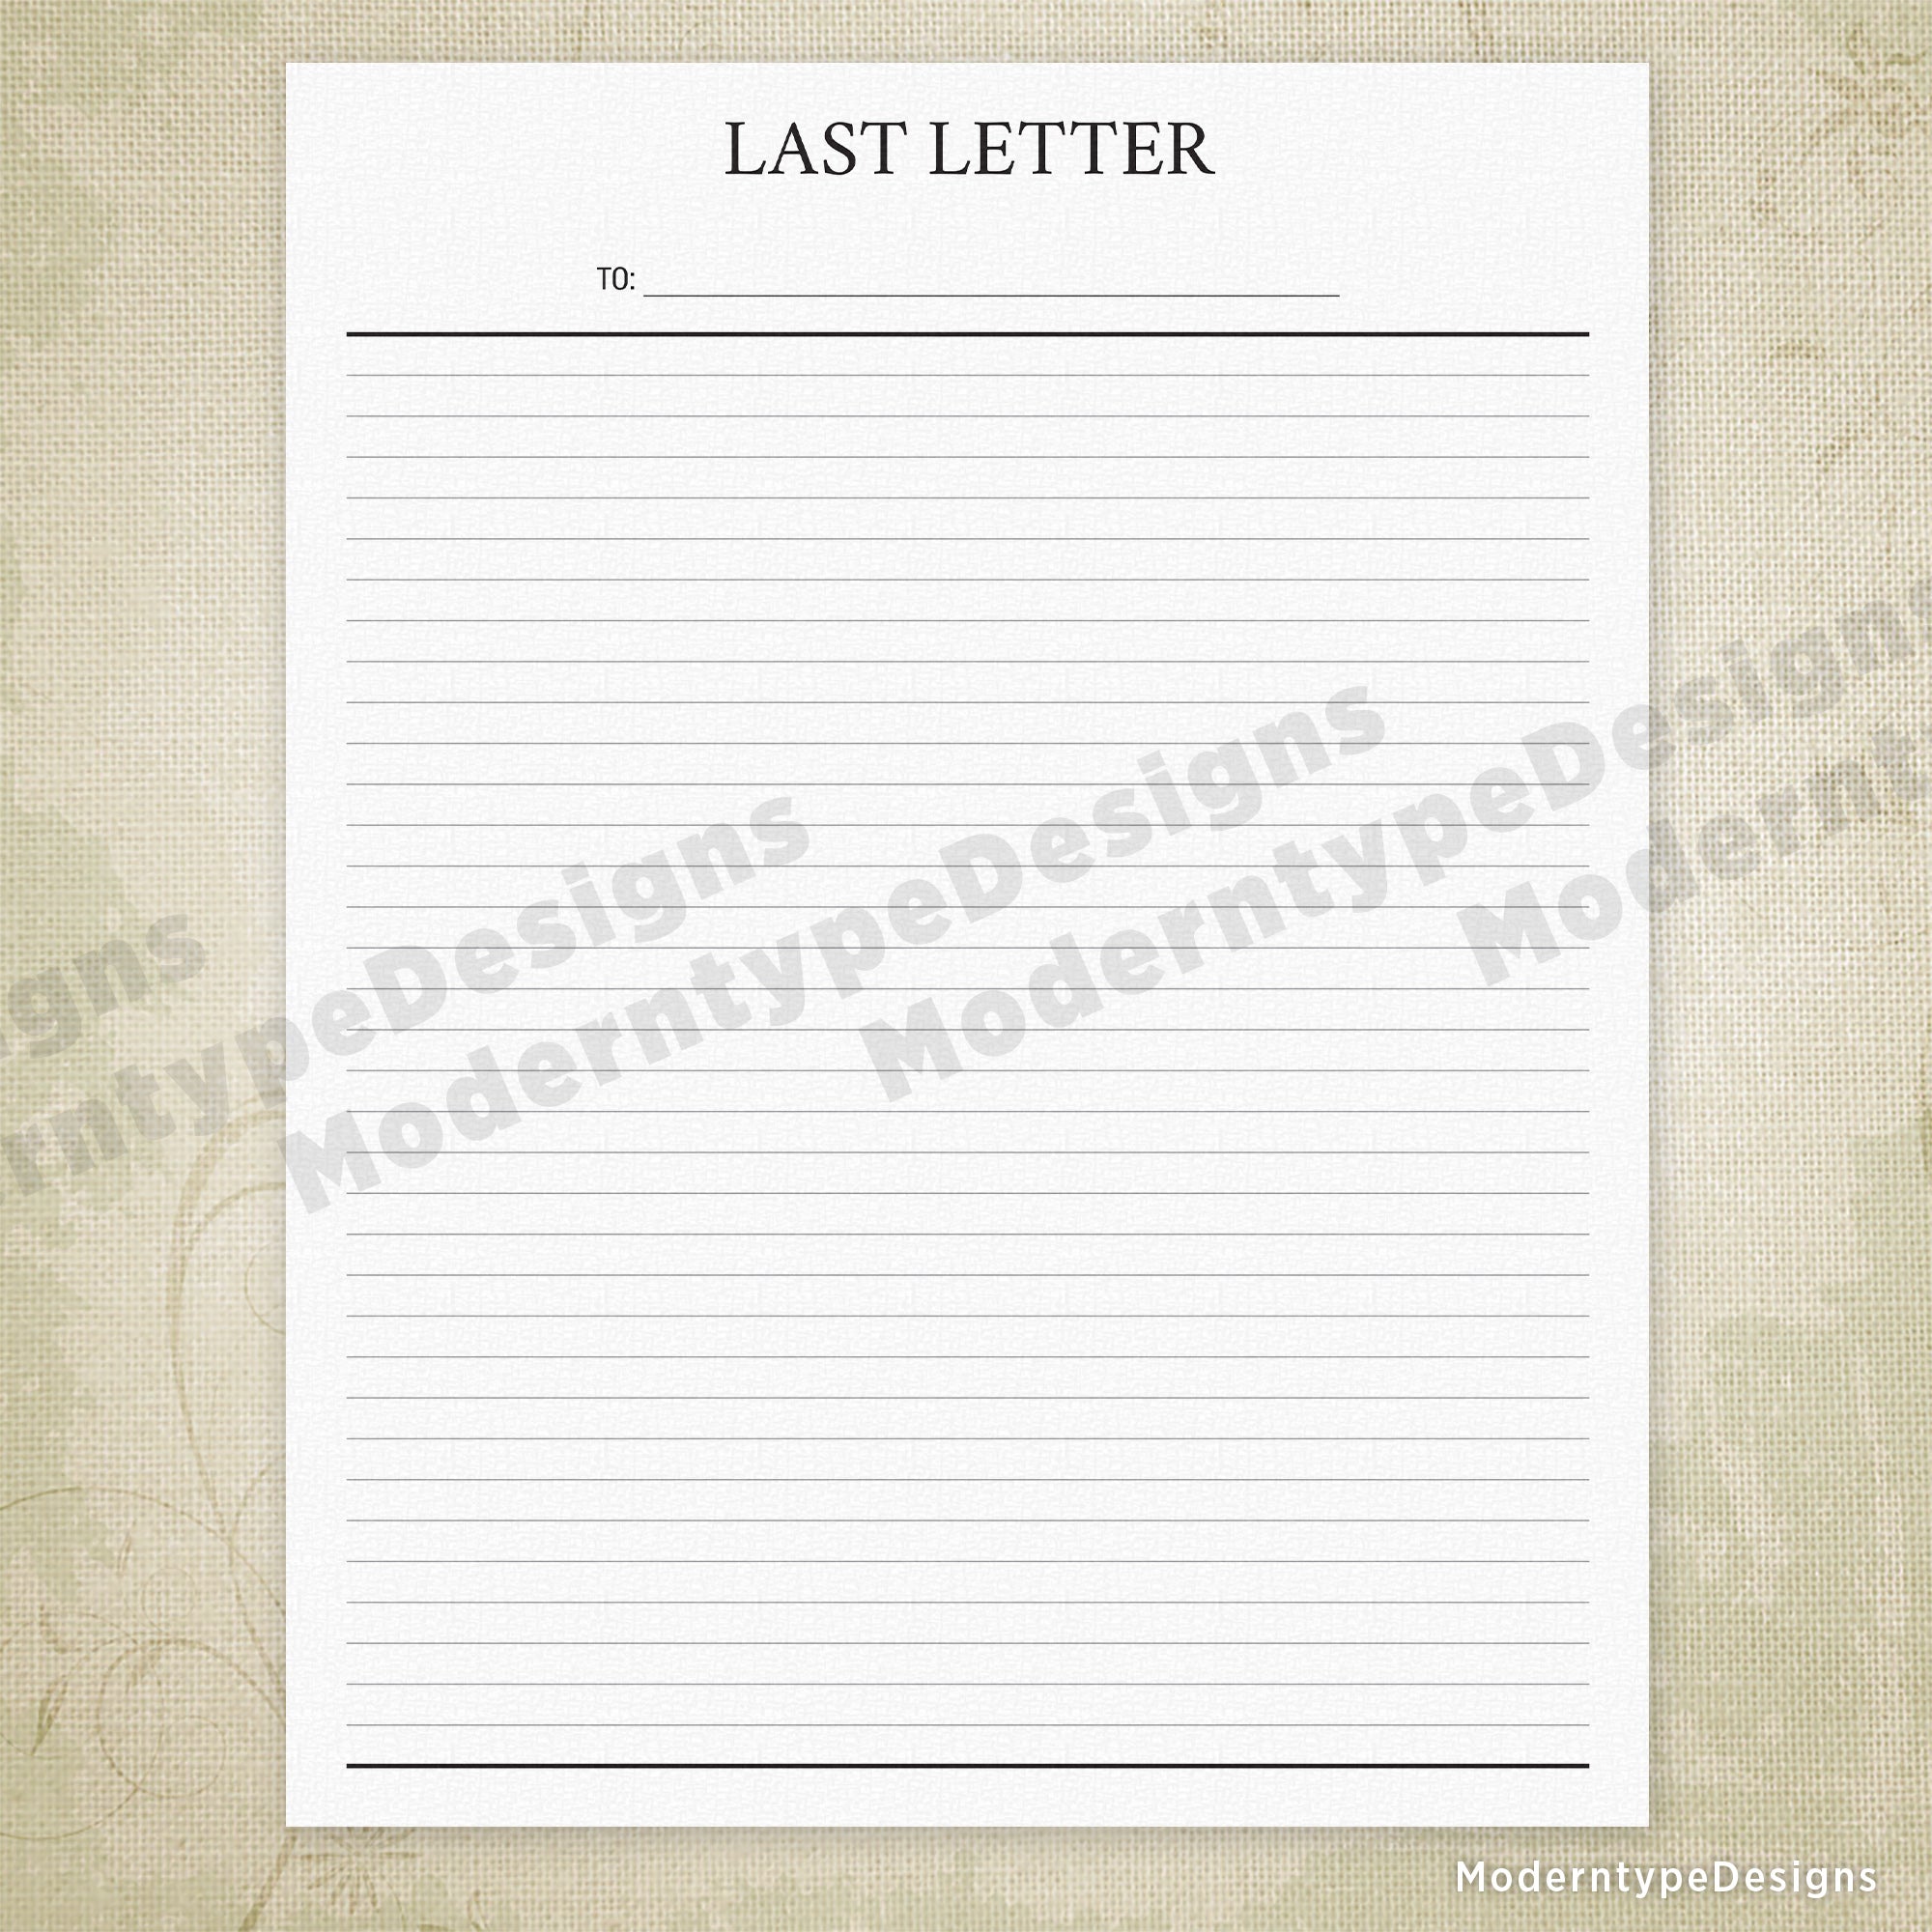 Blank Last Letter Printable - End of Life